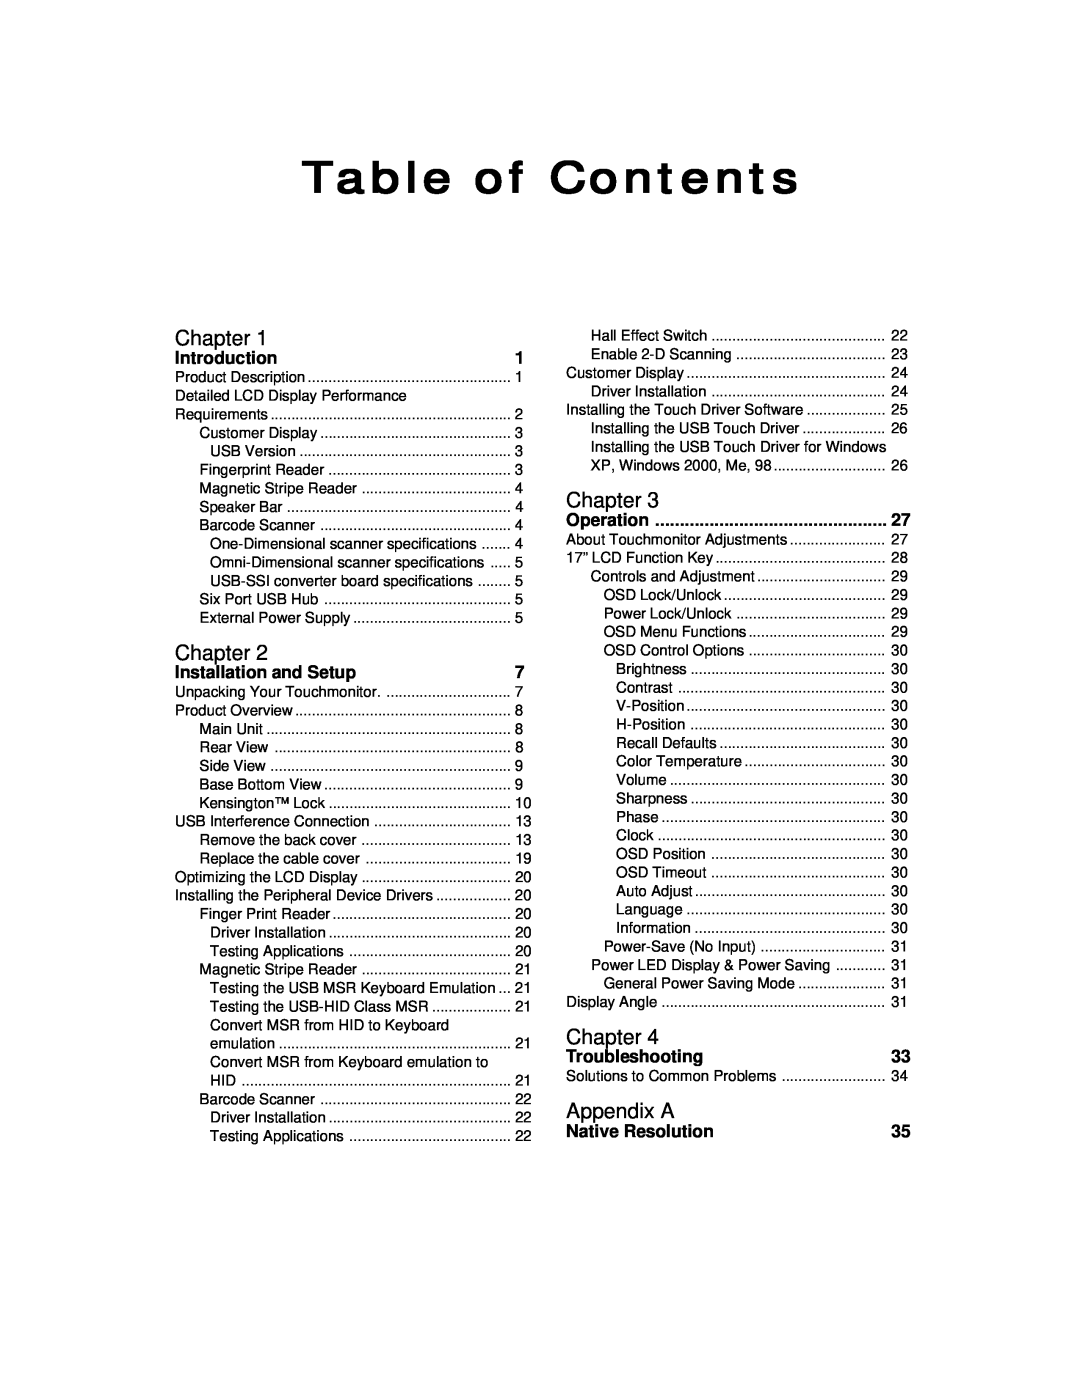 Elo TouchSystems 1729L manual Table of Contents, Chapter, Appendix A, Introduction, Installation and Setup, Troubleshooting 